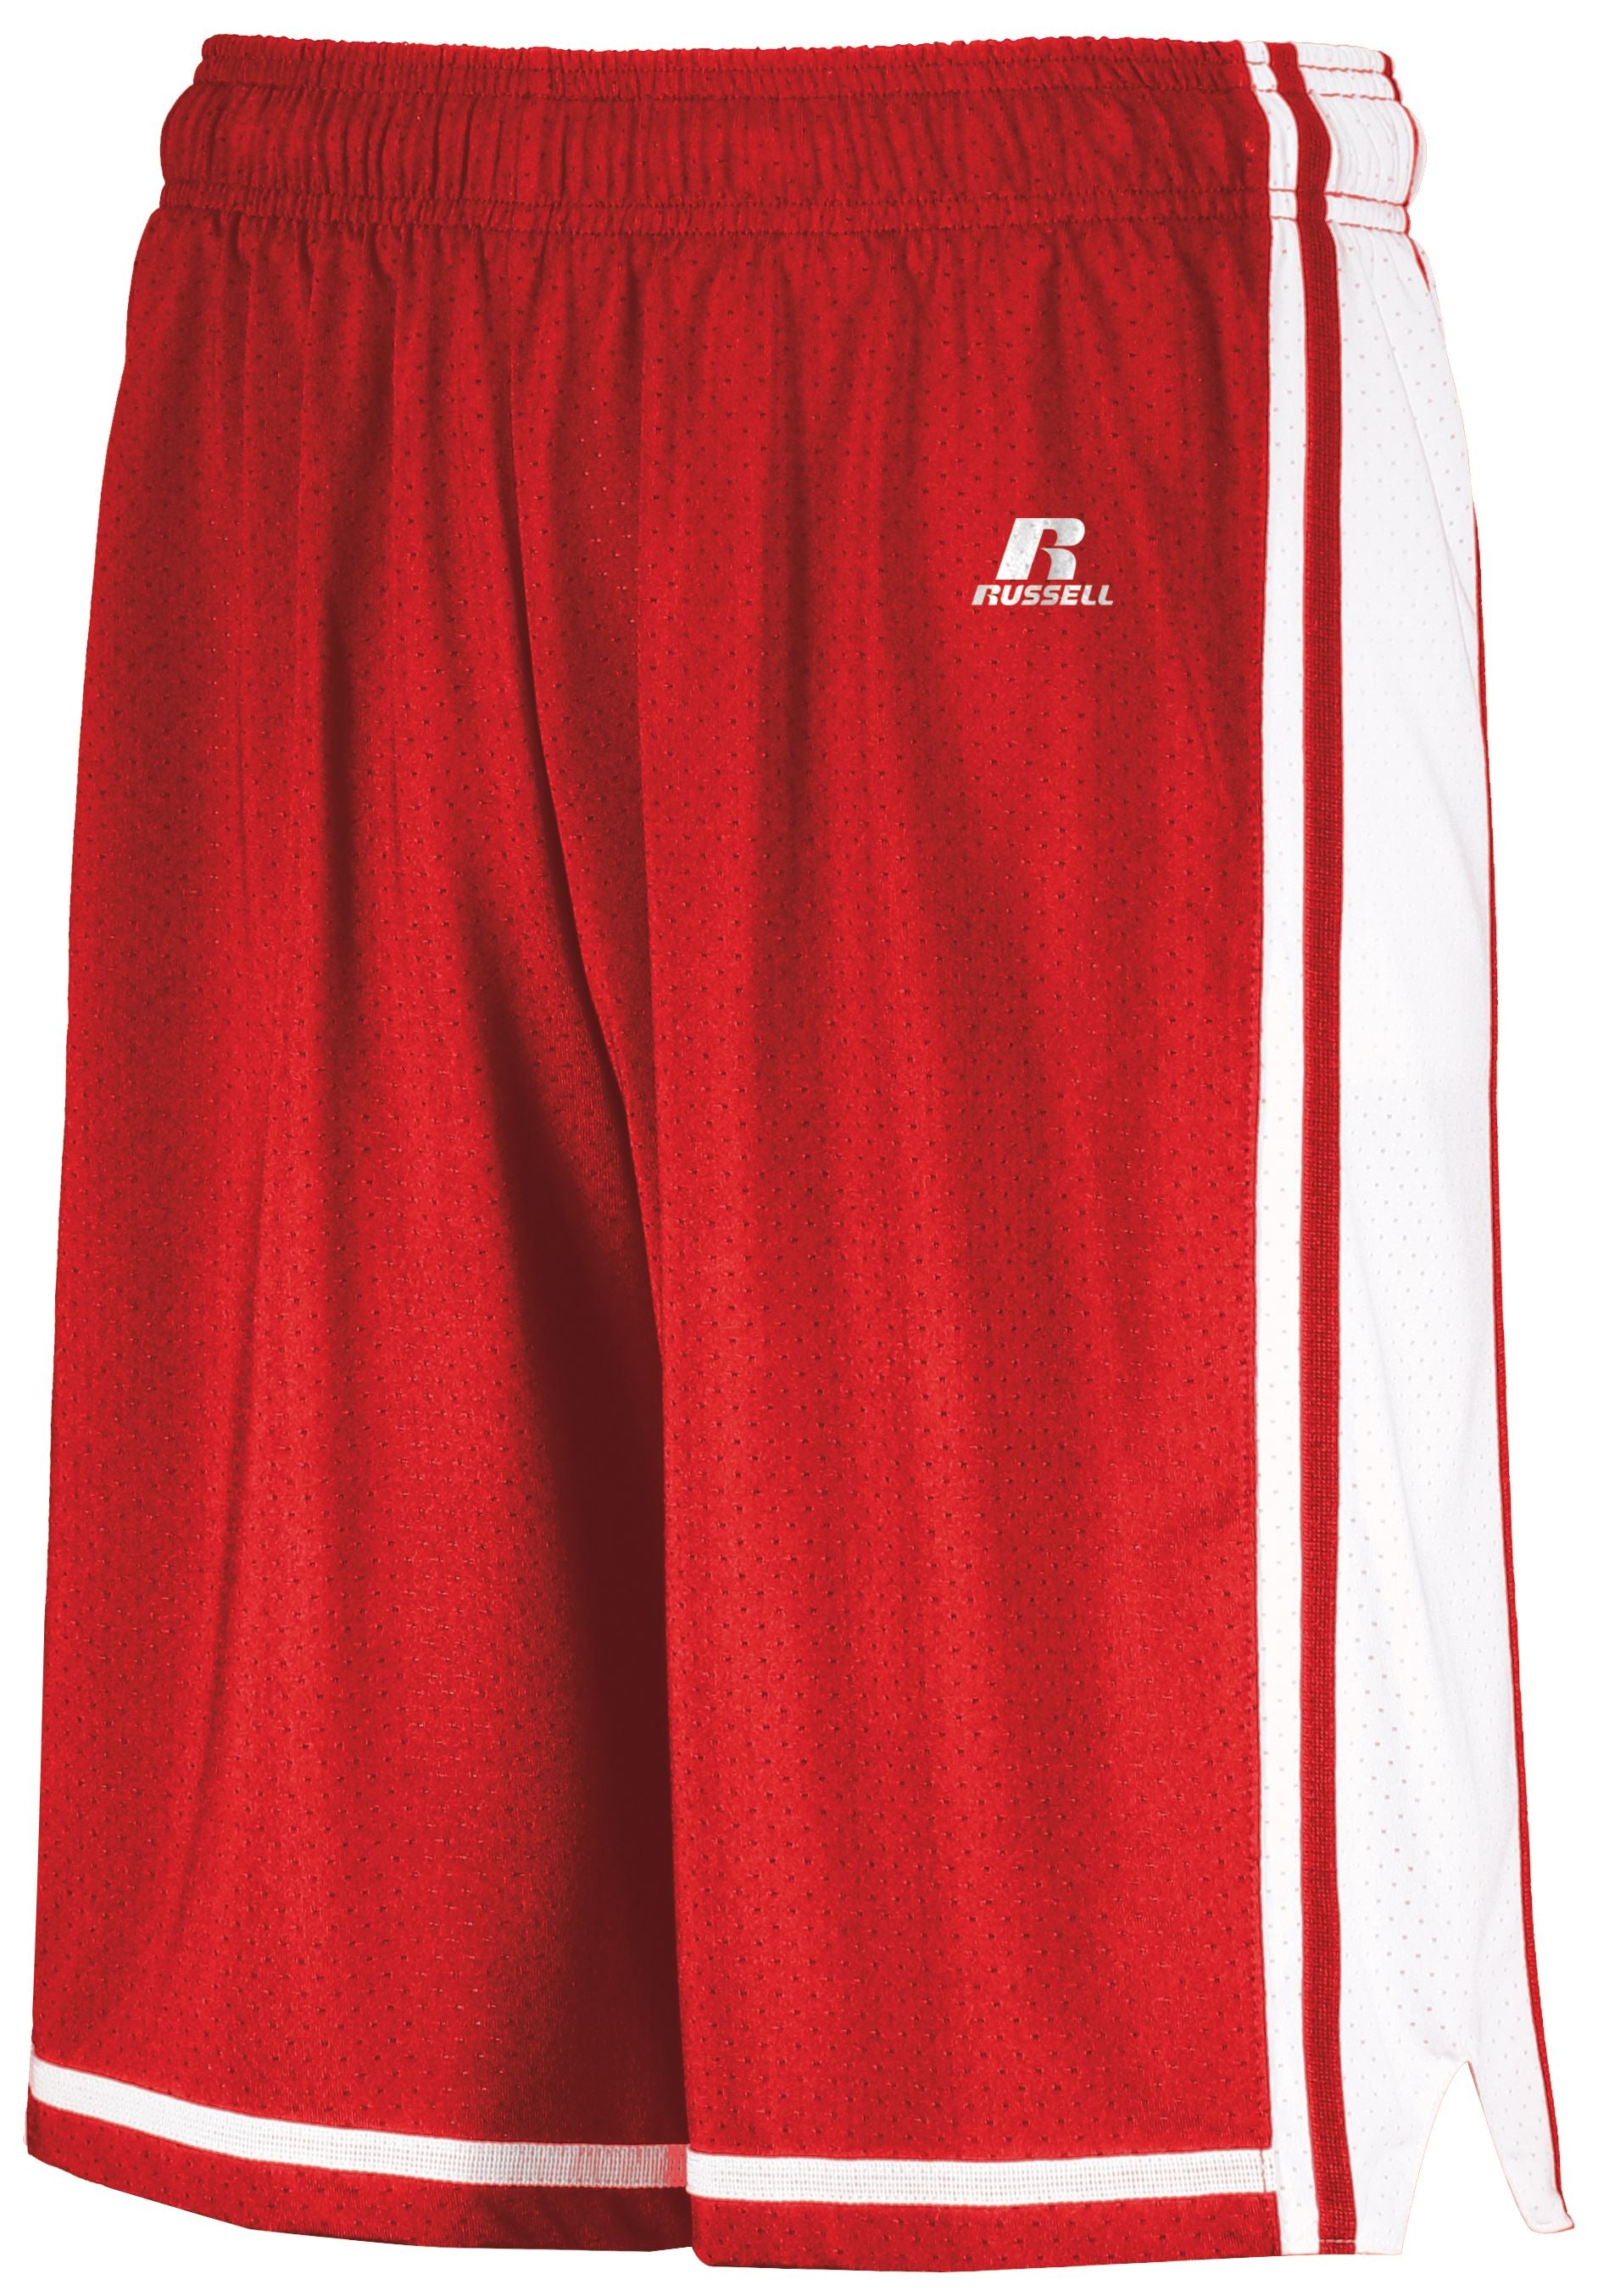 Russell Athletic Youth Legacy Basketball Shorts in True Red/White  -Part of the Youth, Youth-Shorts, Basketball, Russell-Athletic-Products, All-Sports, All-Sports-1 product lines at KanaleyCreations.com